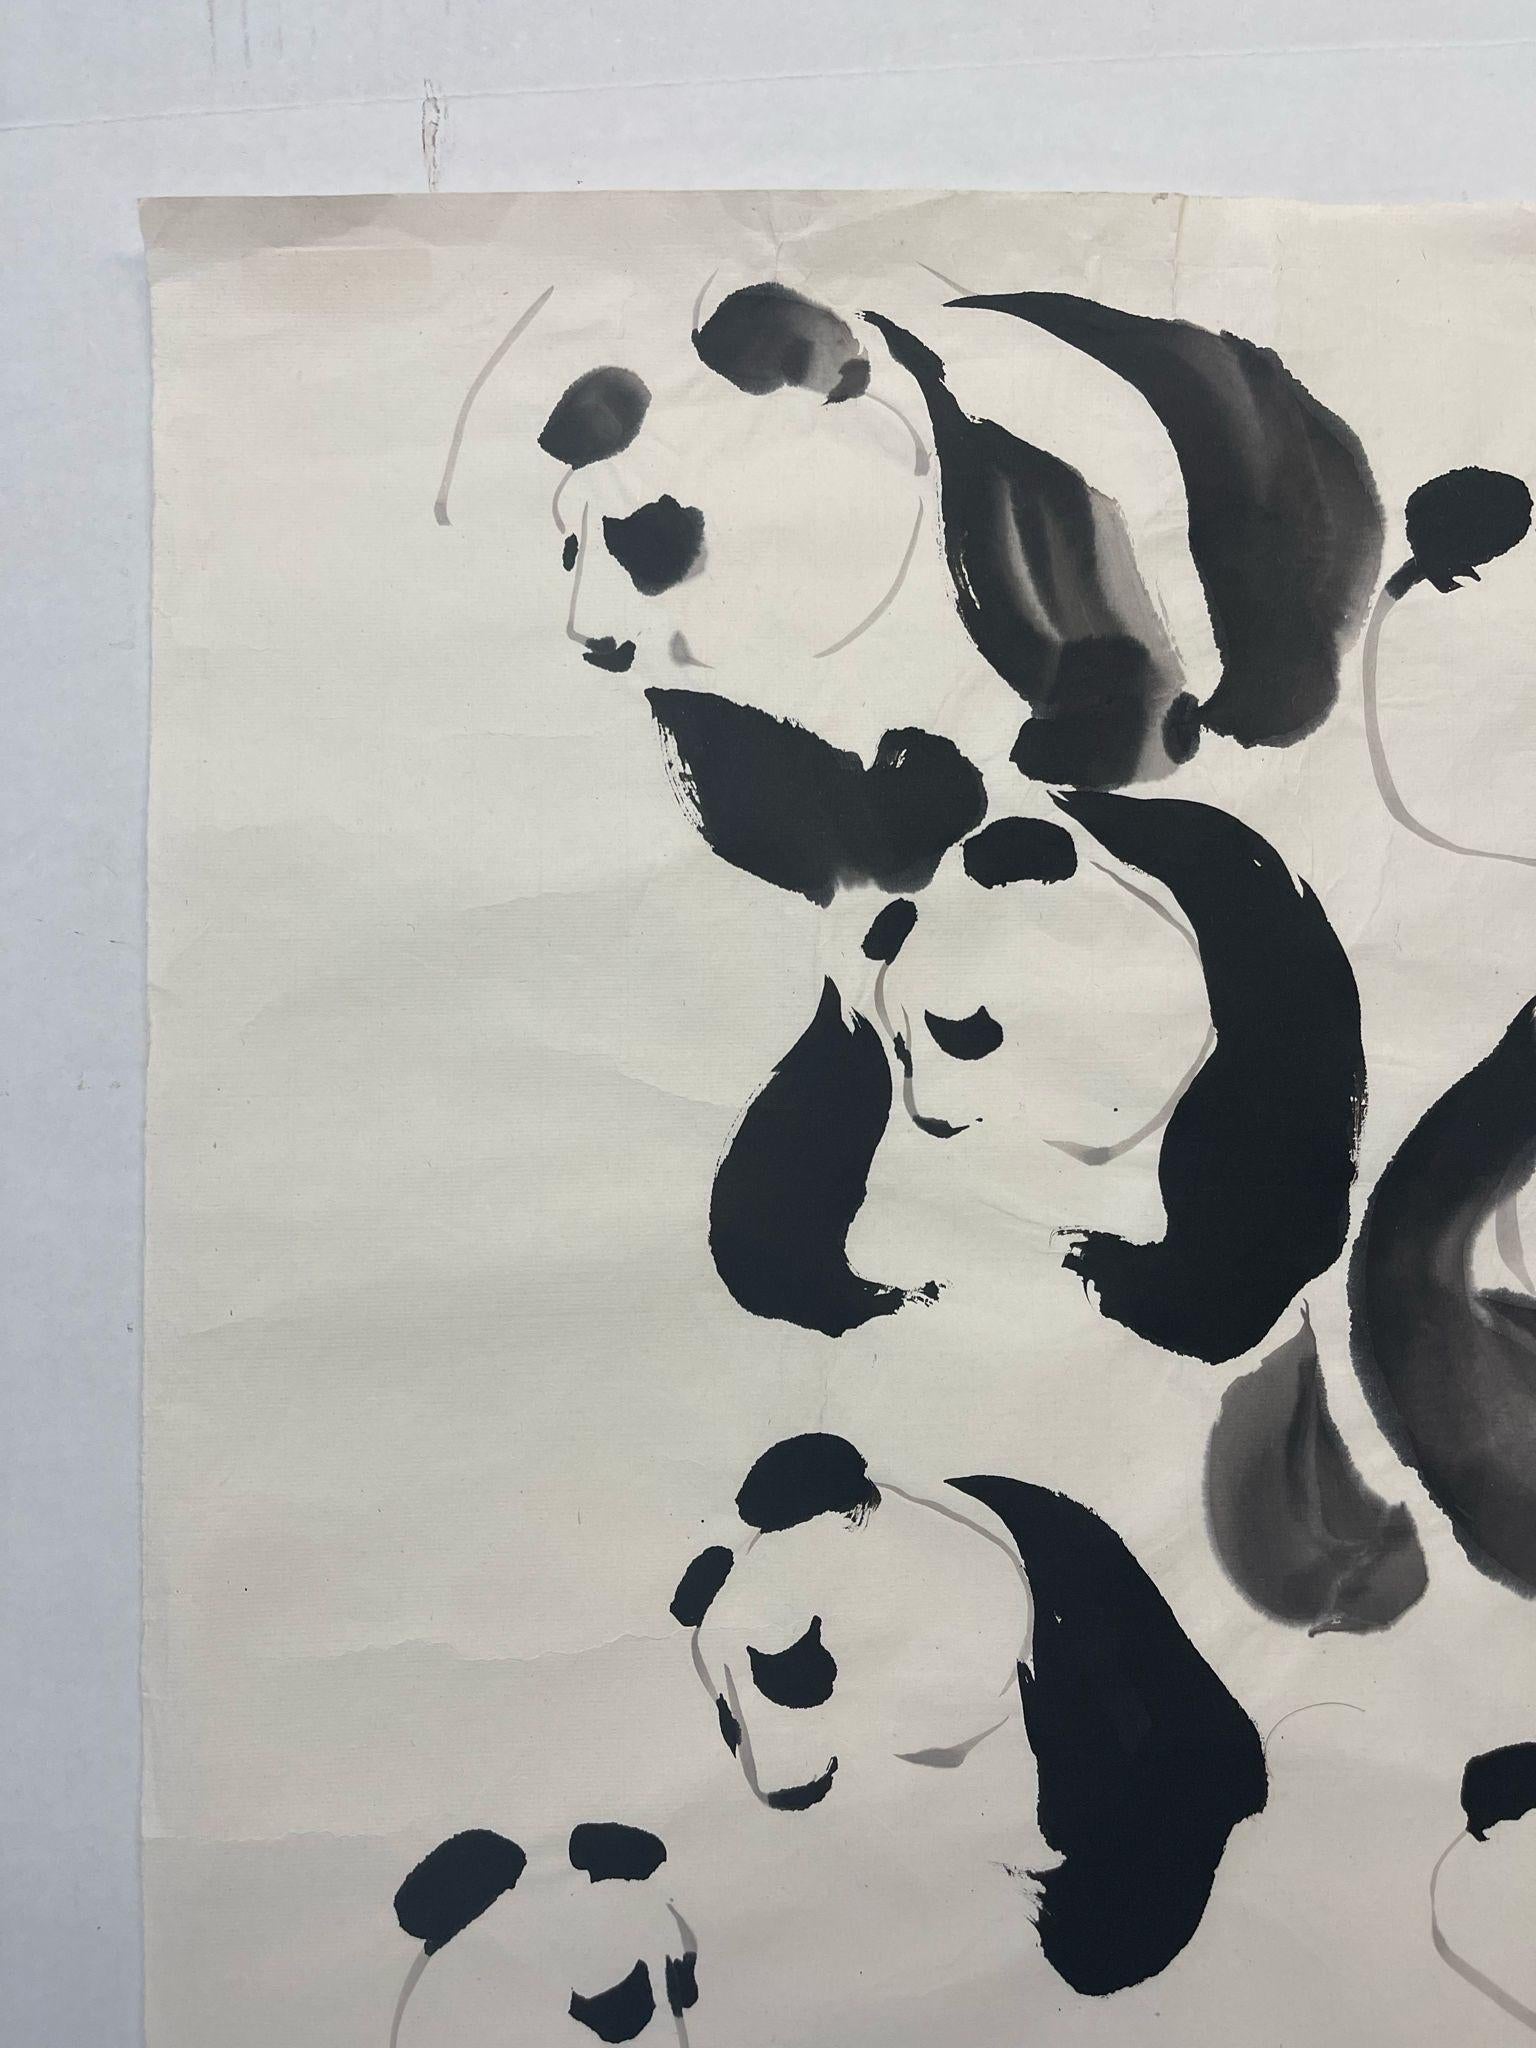 Paper Vintage Signed Original Watercolor Painting of Panda Bear Study. For Sale